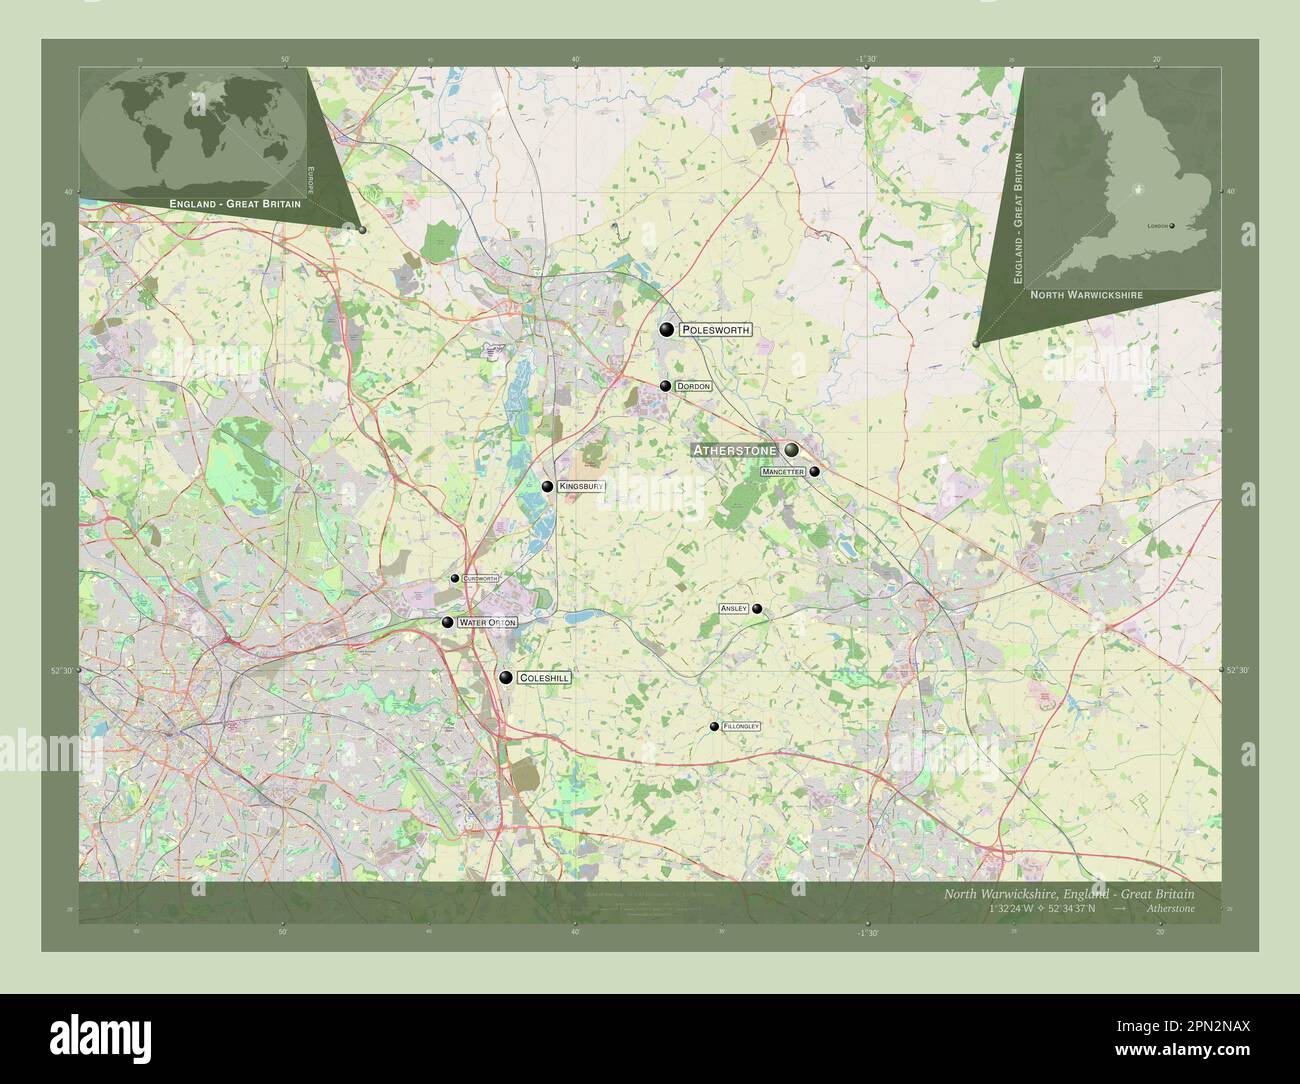 North Warwickshire, non metropolitan district of England - Great Britain. Open Street Map. Locations and names of major cities of the region. Corner a Stock Photo